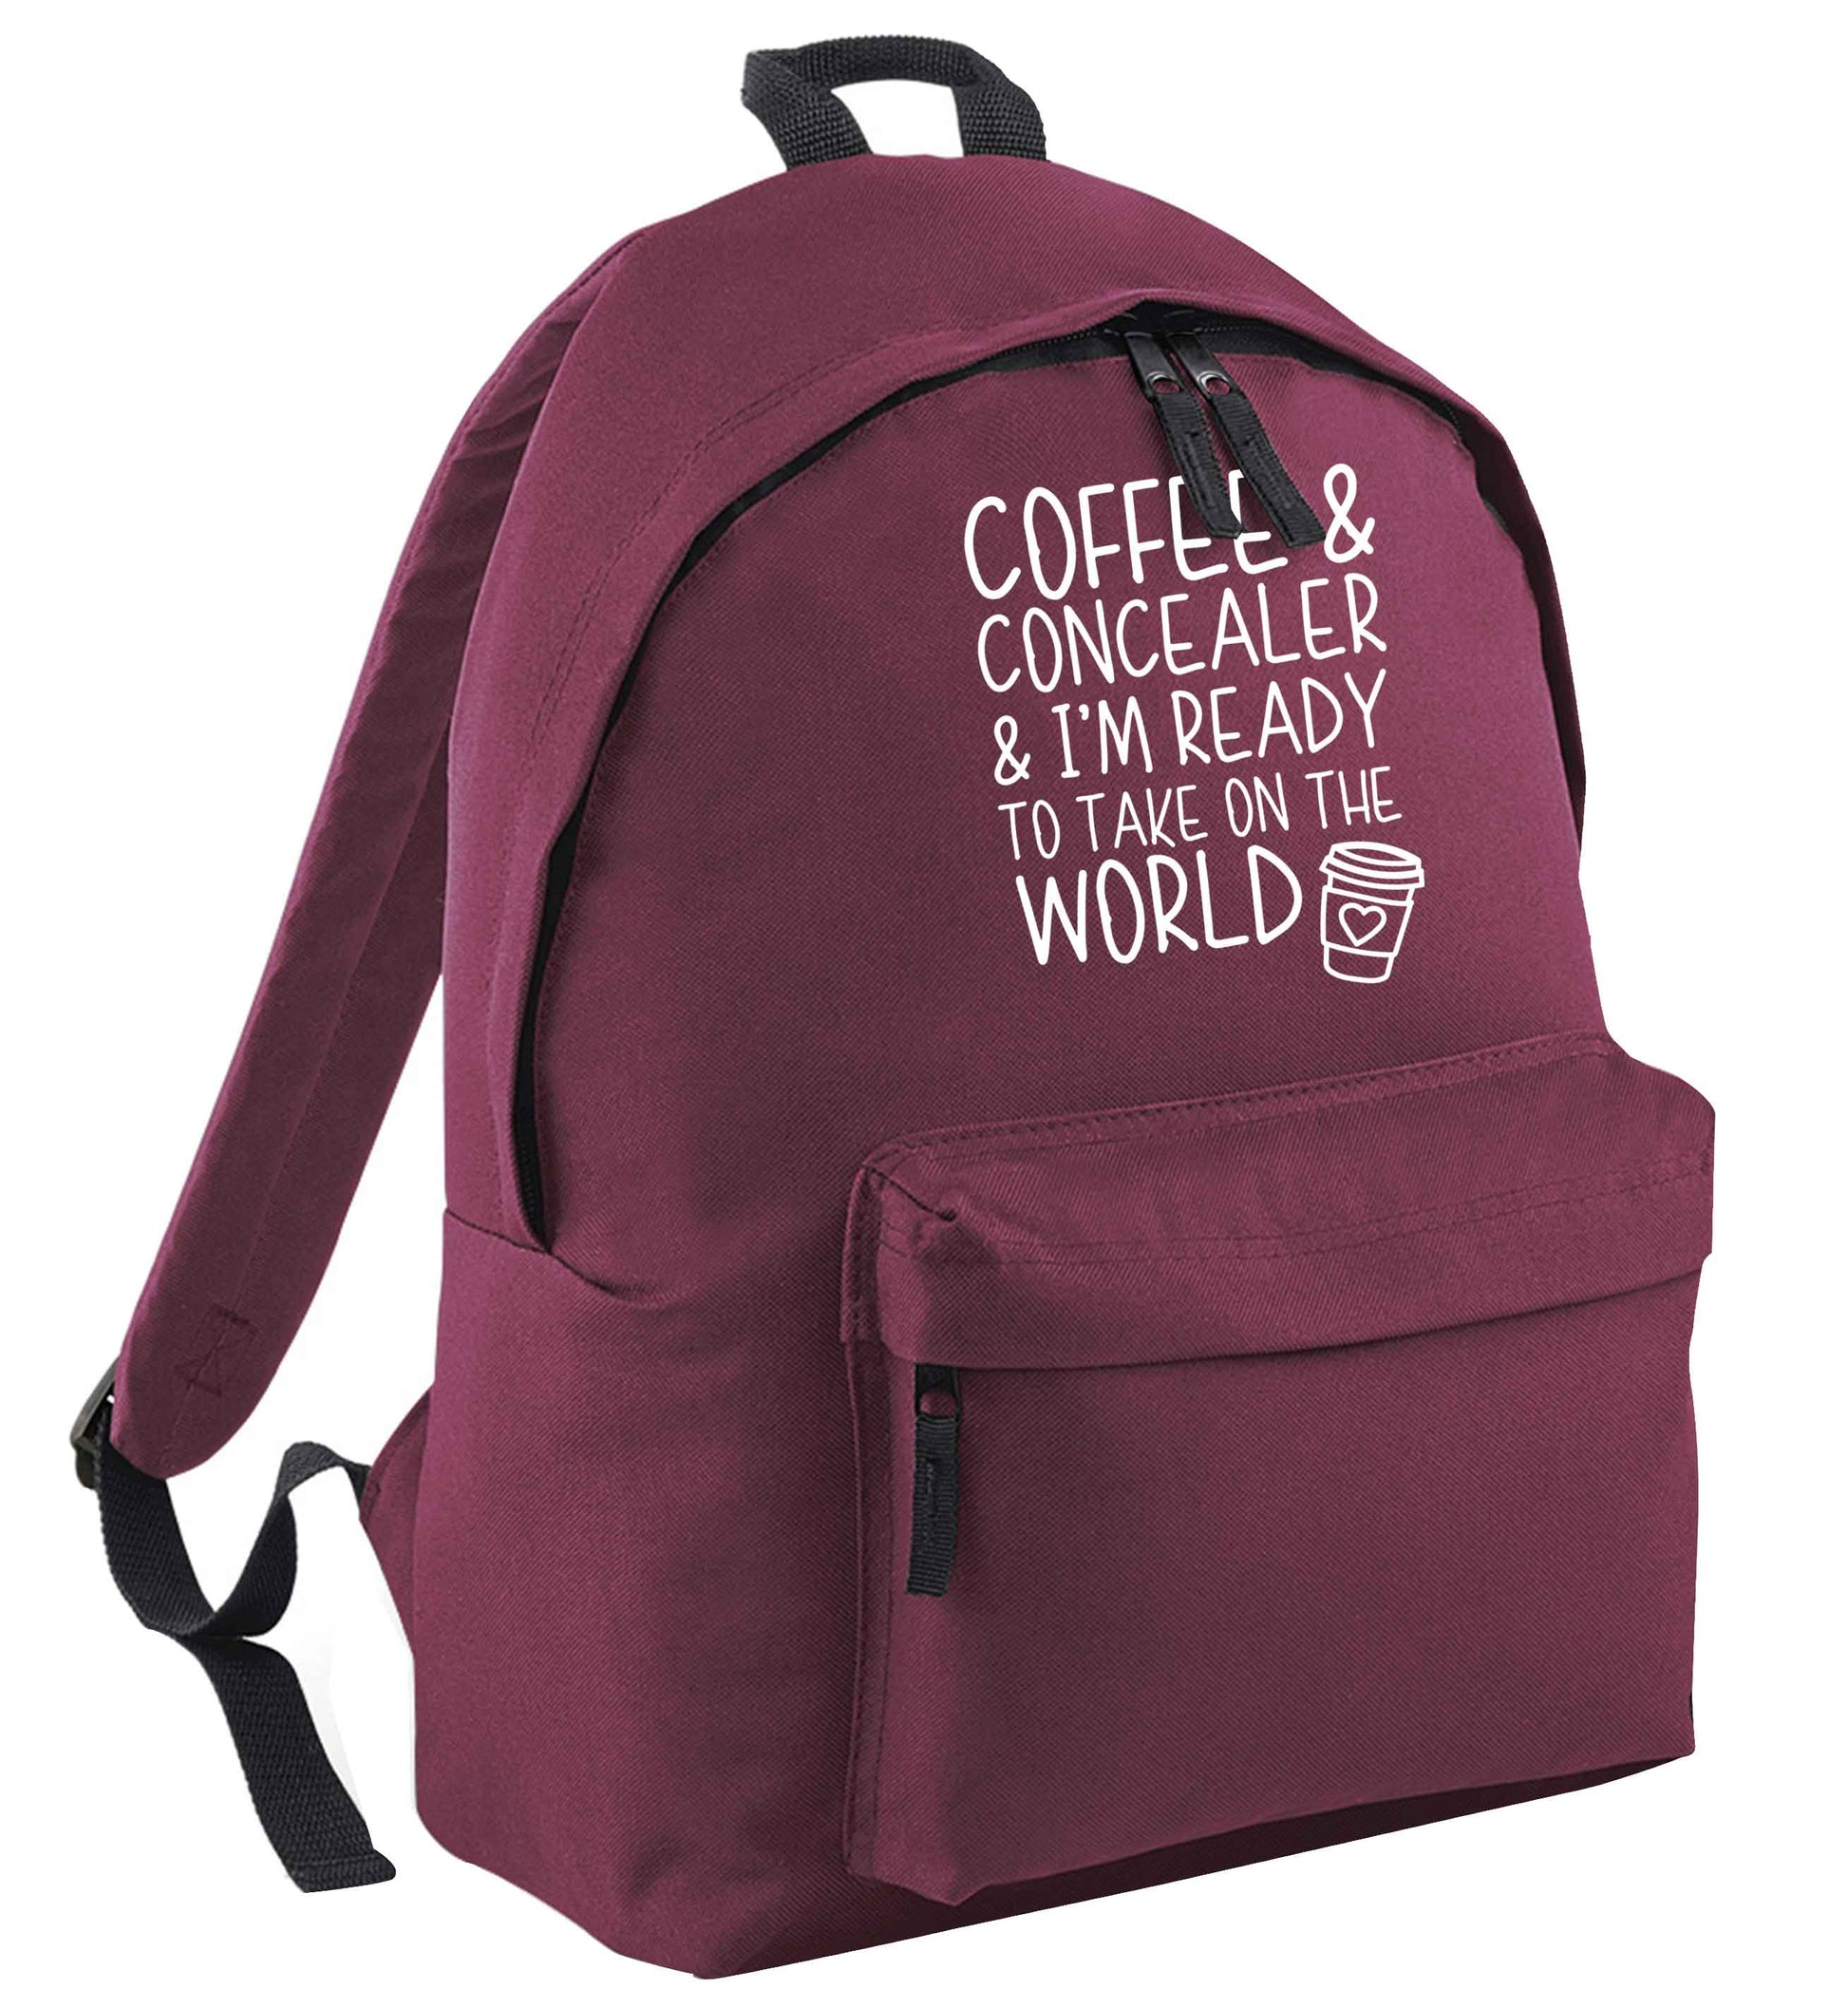 Coffee and concealer and I'm ready to take on the world maroon adults backpack